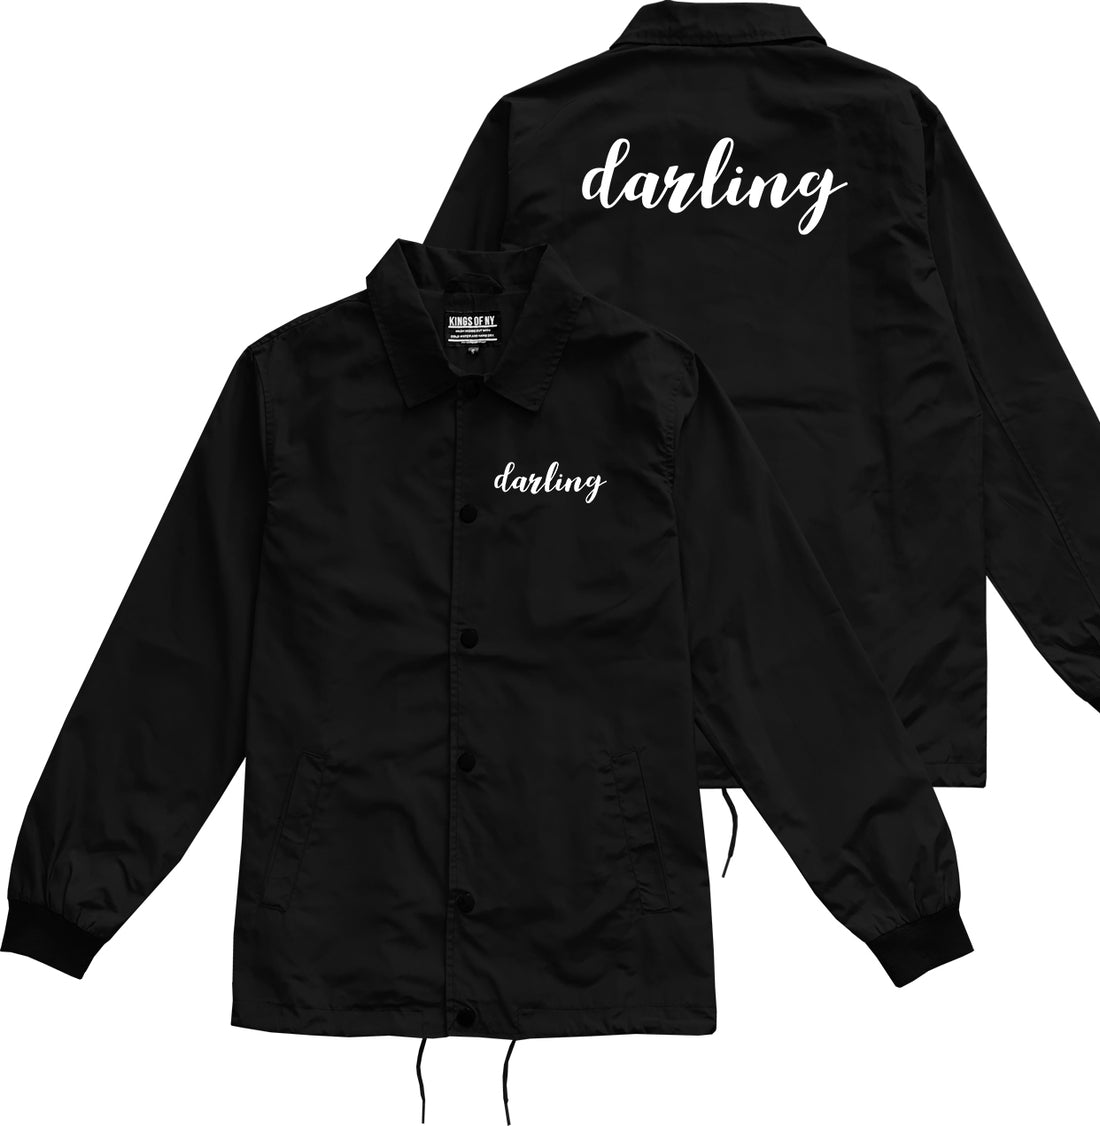 Darling Script Black Coaches Jacket by Kings Of NY